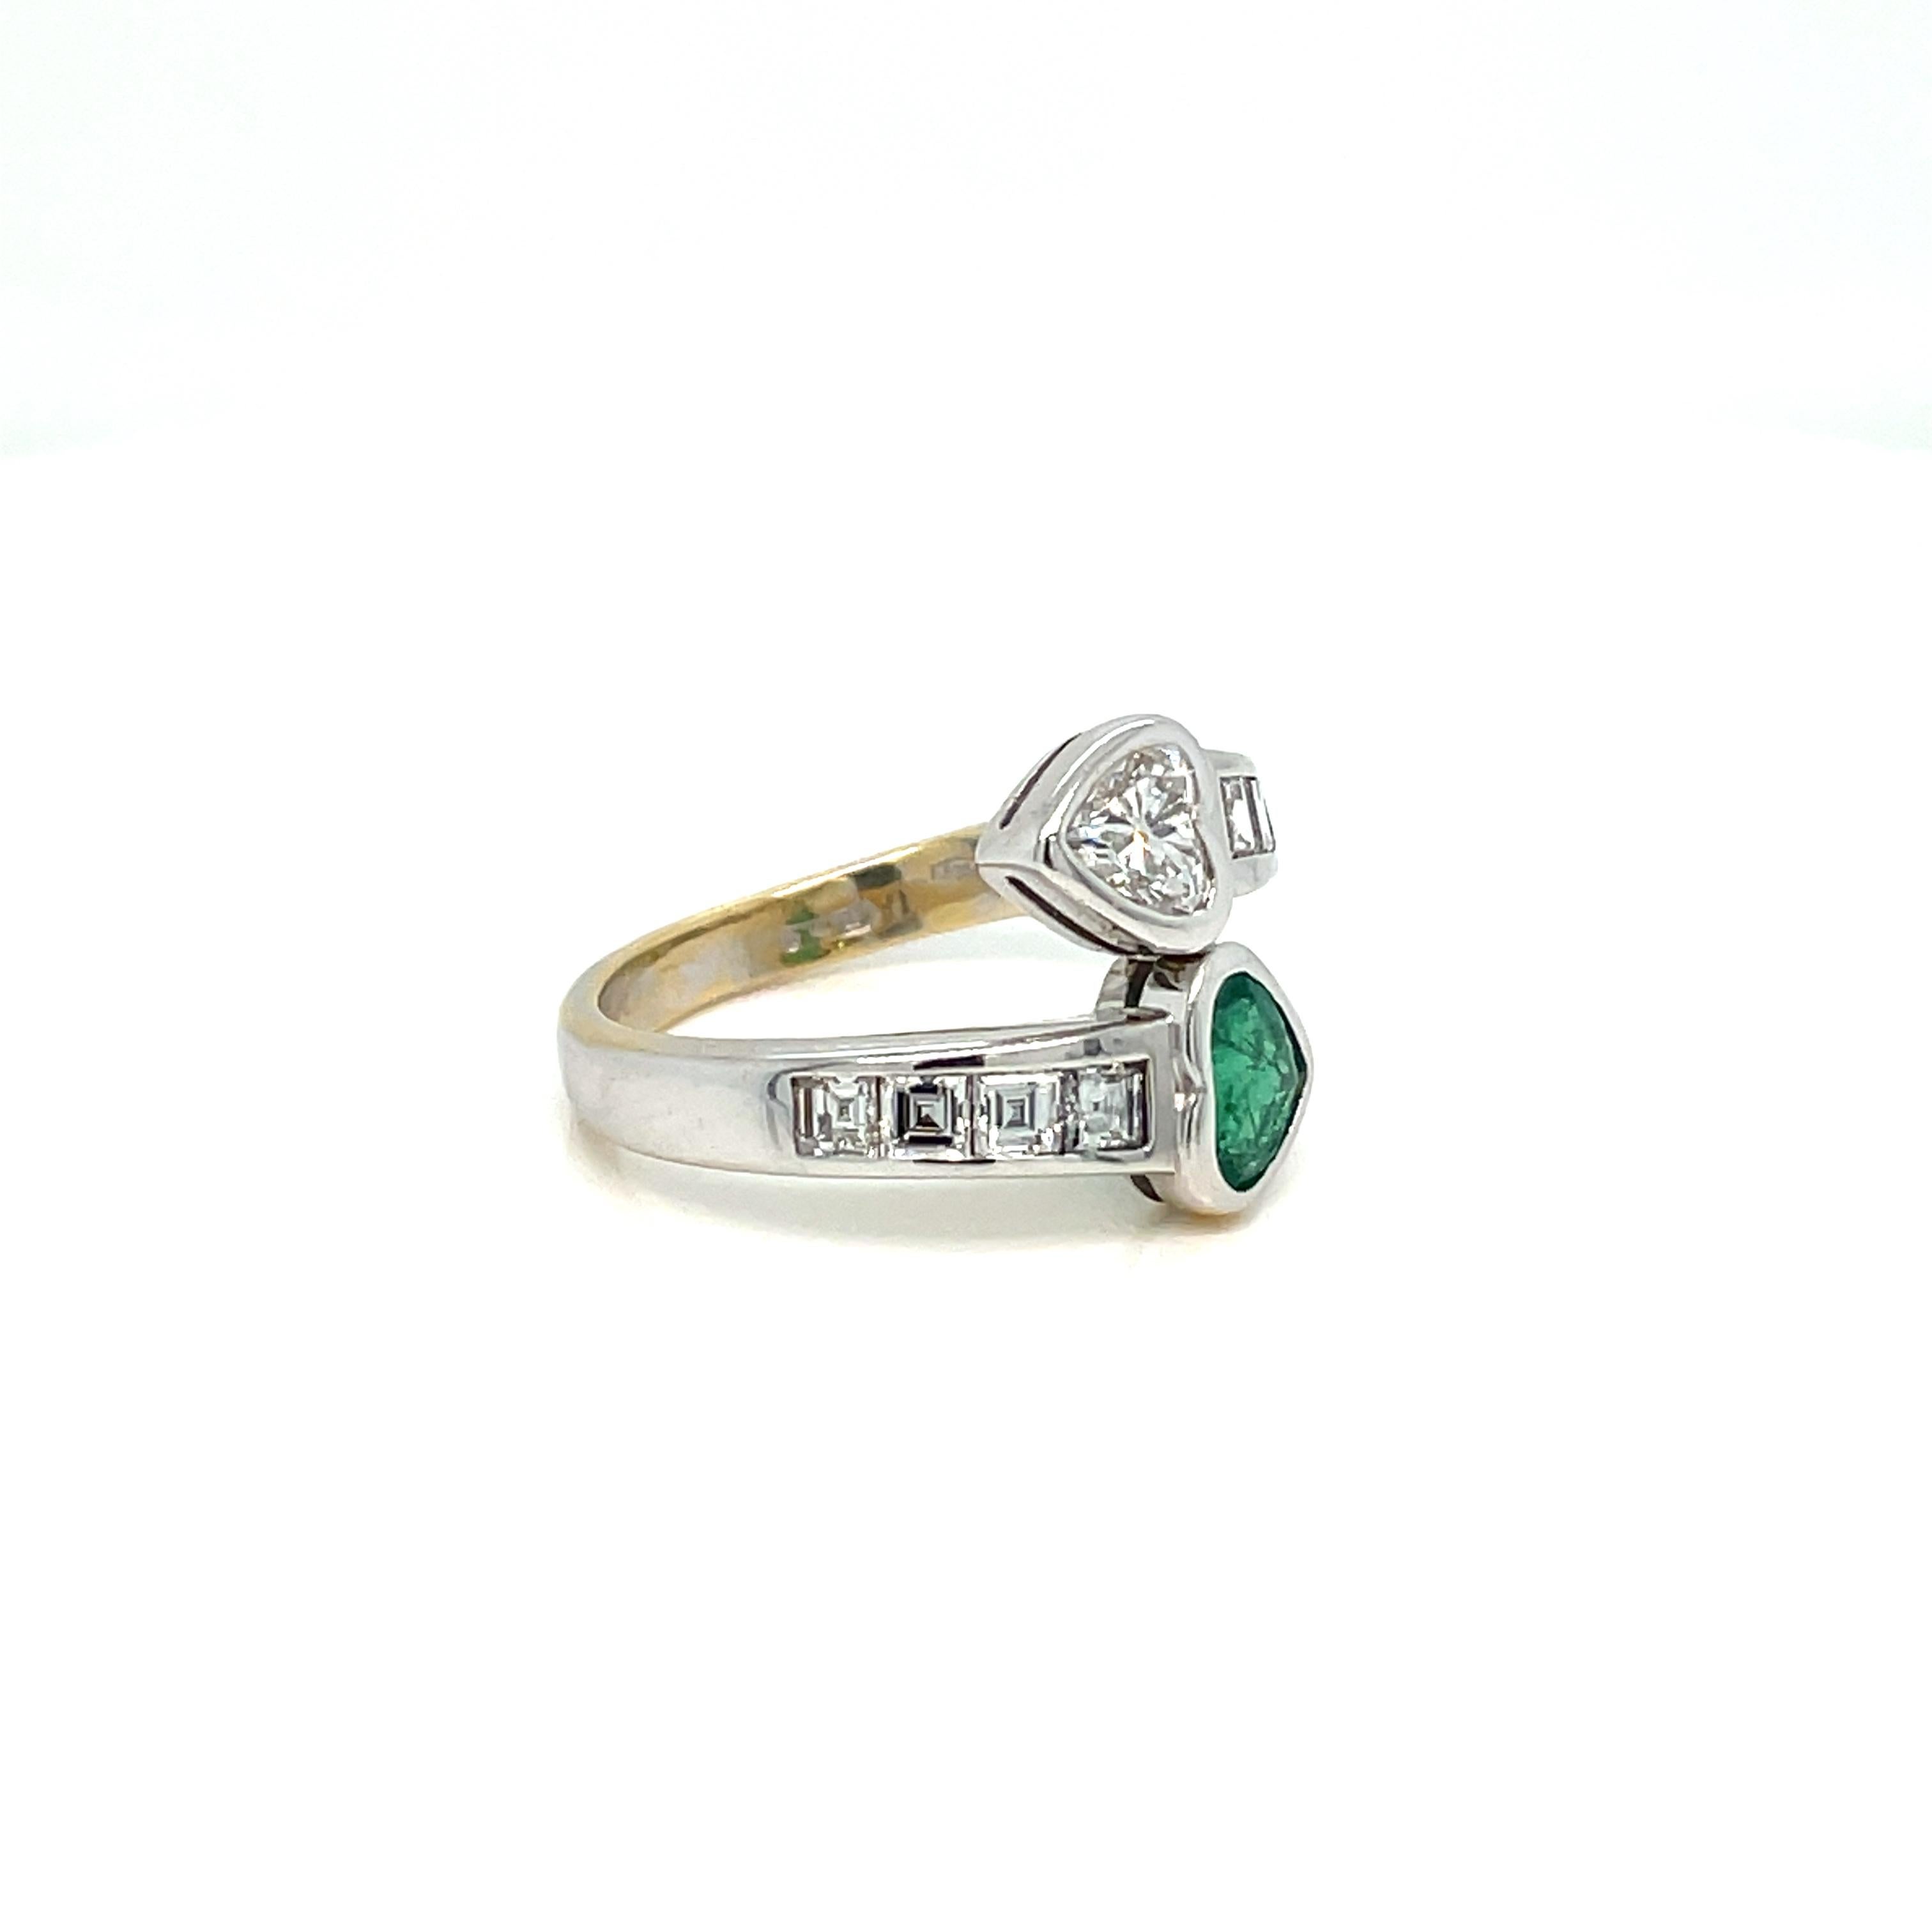 Beautiful and unique 18k white gold 'Vous et Moi' ring set with a Beautiful heart cut fine Colombian Emerald weighing 0.60 carat, and one sparkling heart Cut Diamond weighing 0.60 carat, graded F color Vvs1 clarity, surrounded by eight baguette